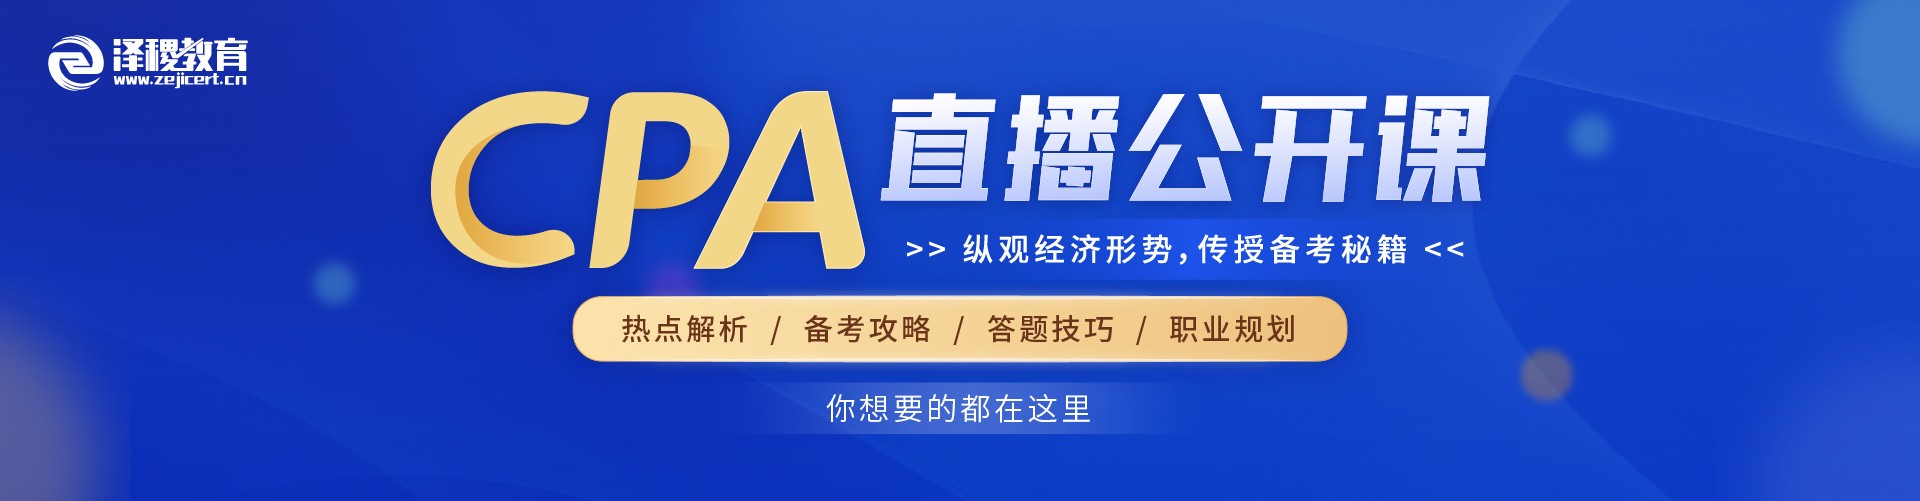 CPA直播公开课